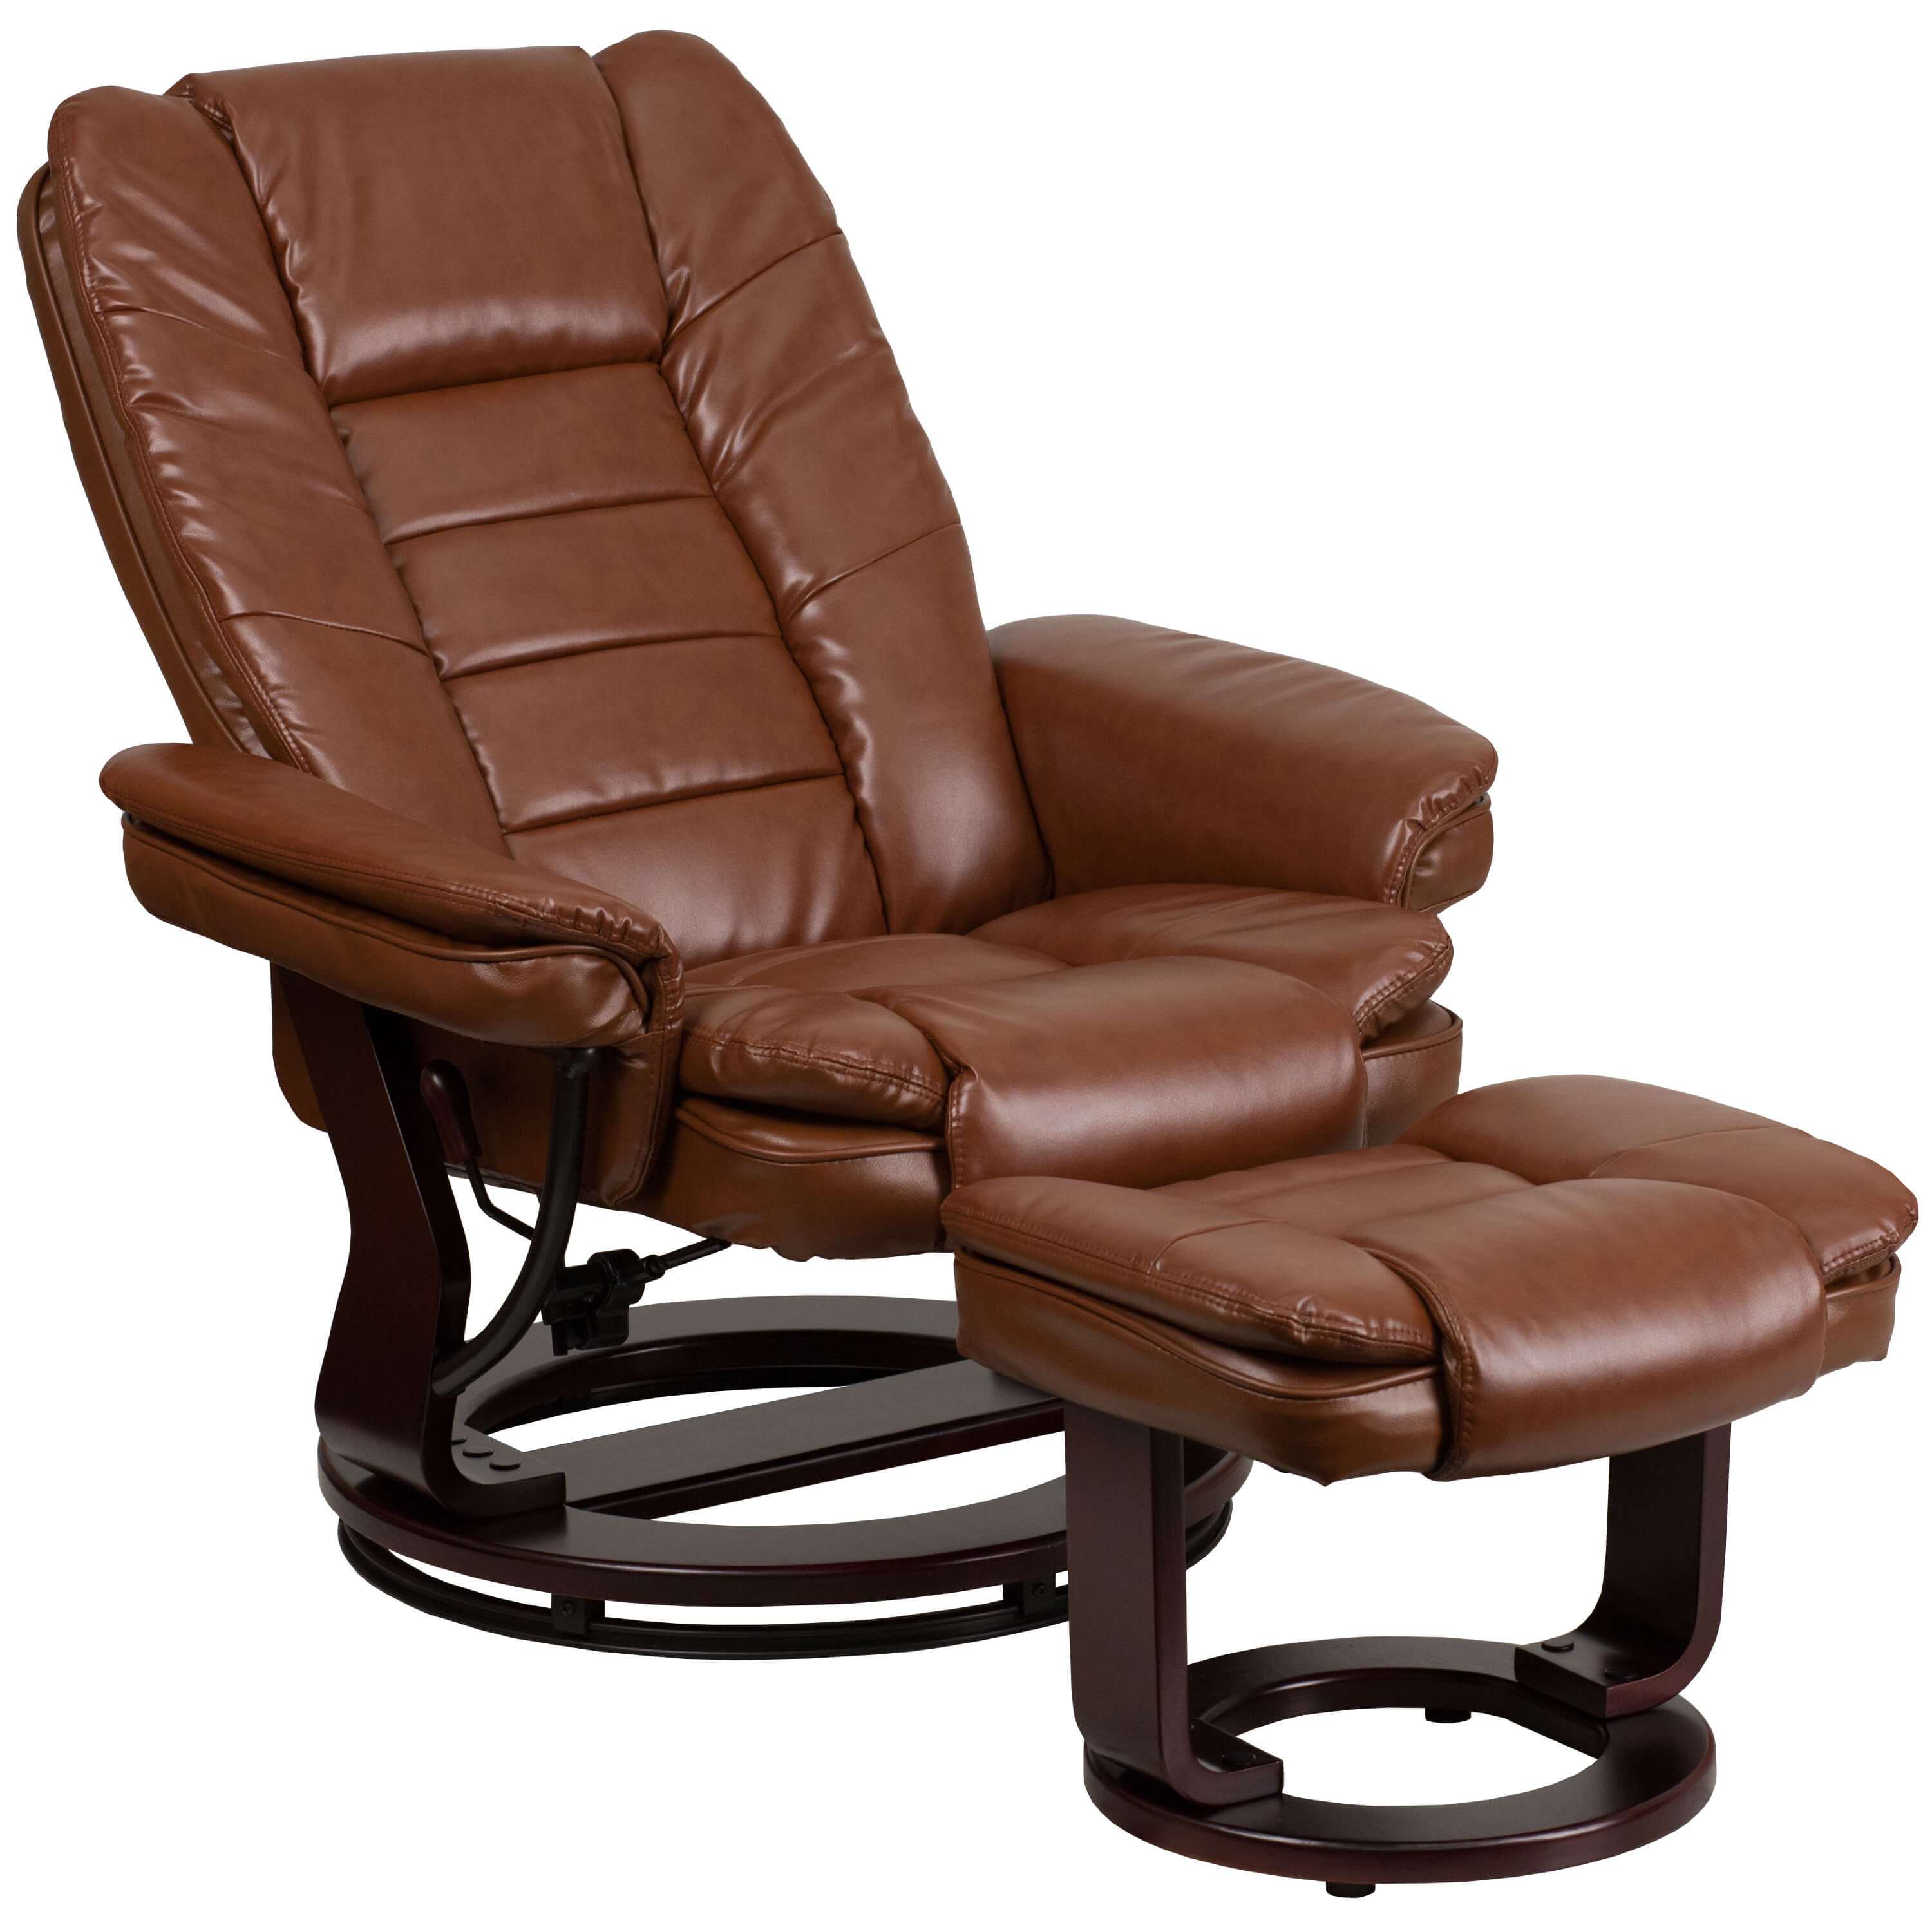 Contemporary recliner chair reclined view